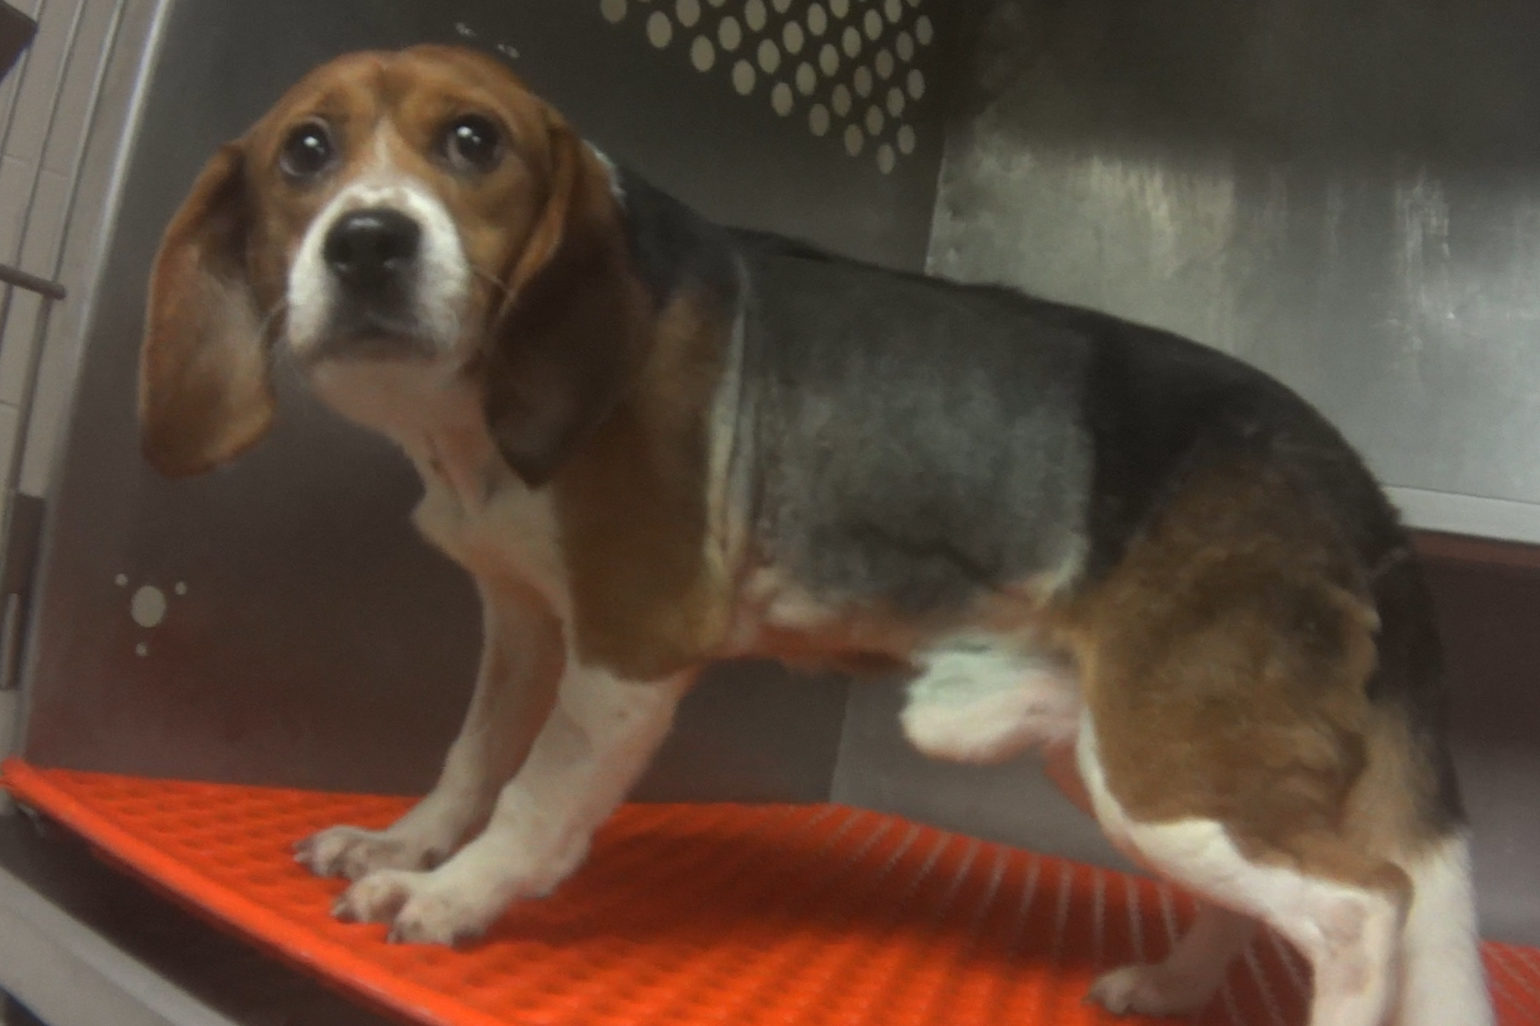 Dow Agrosciences ends pesticide test on beagles · A Humane World